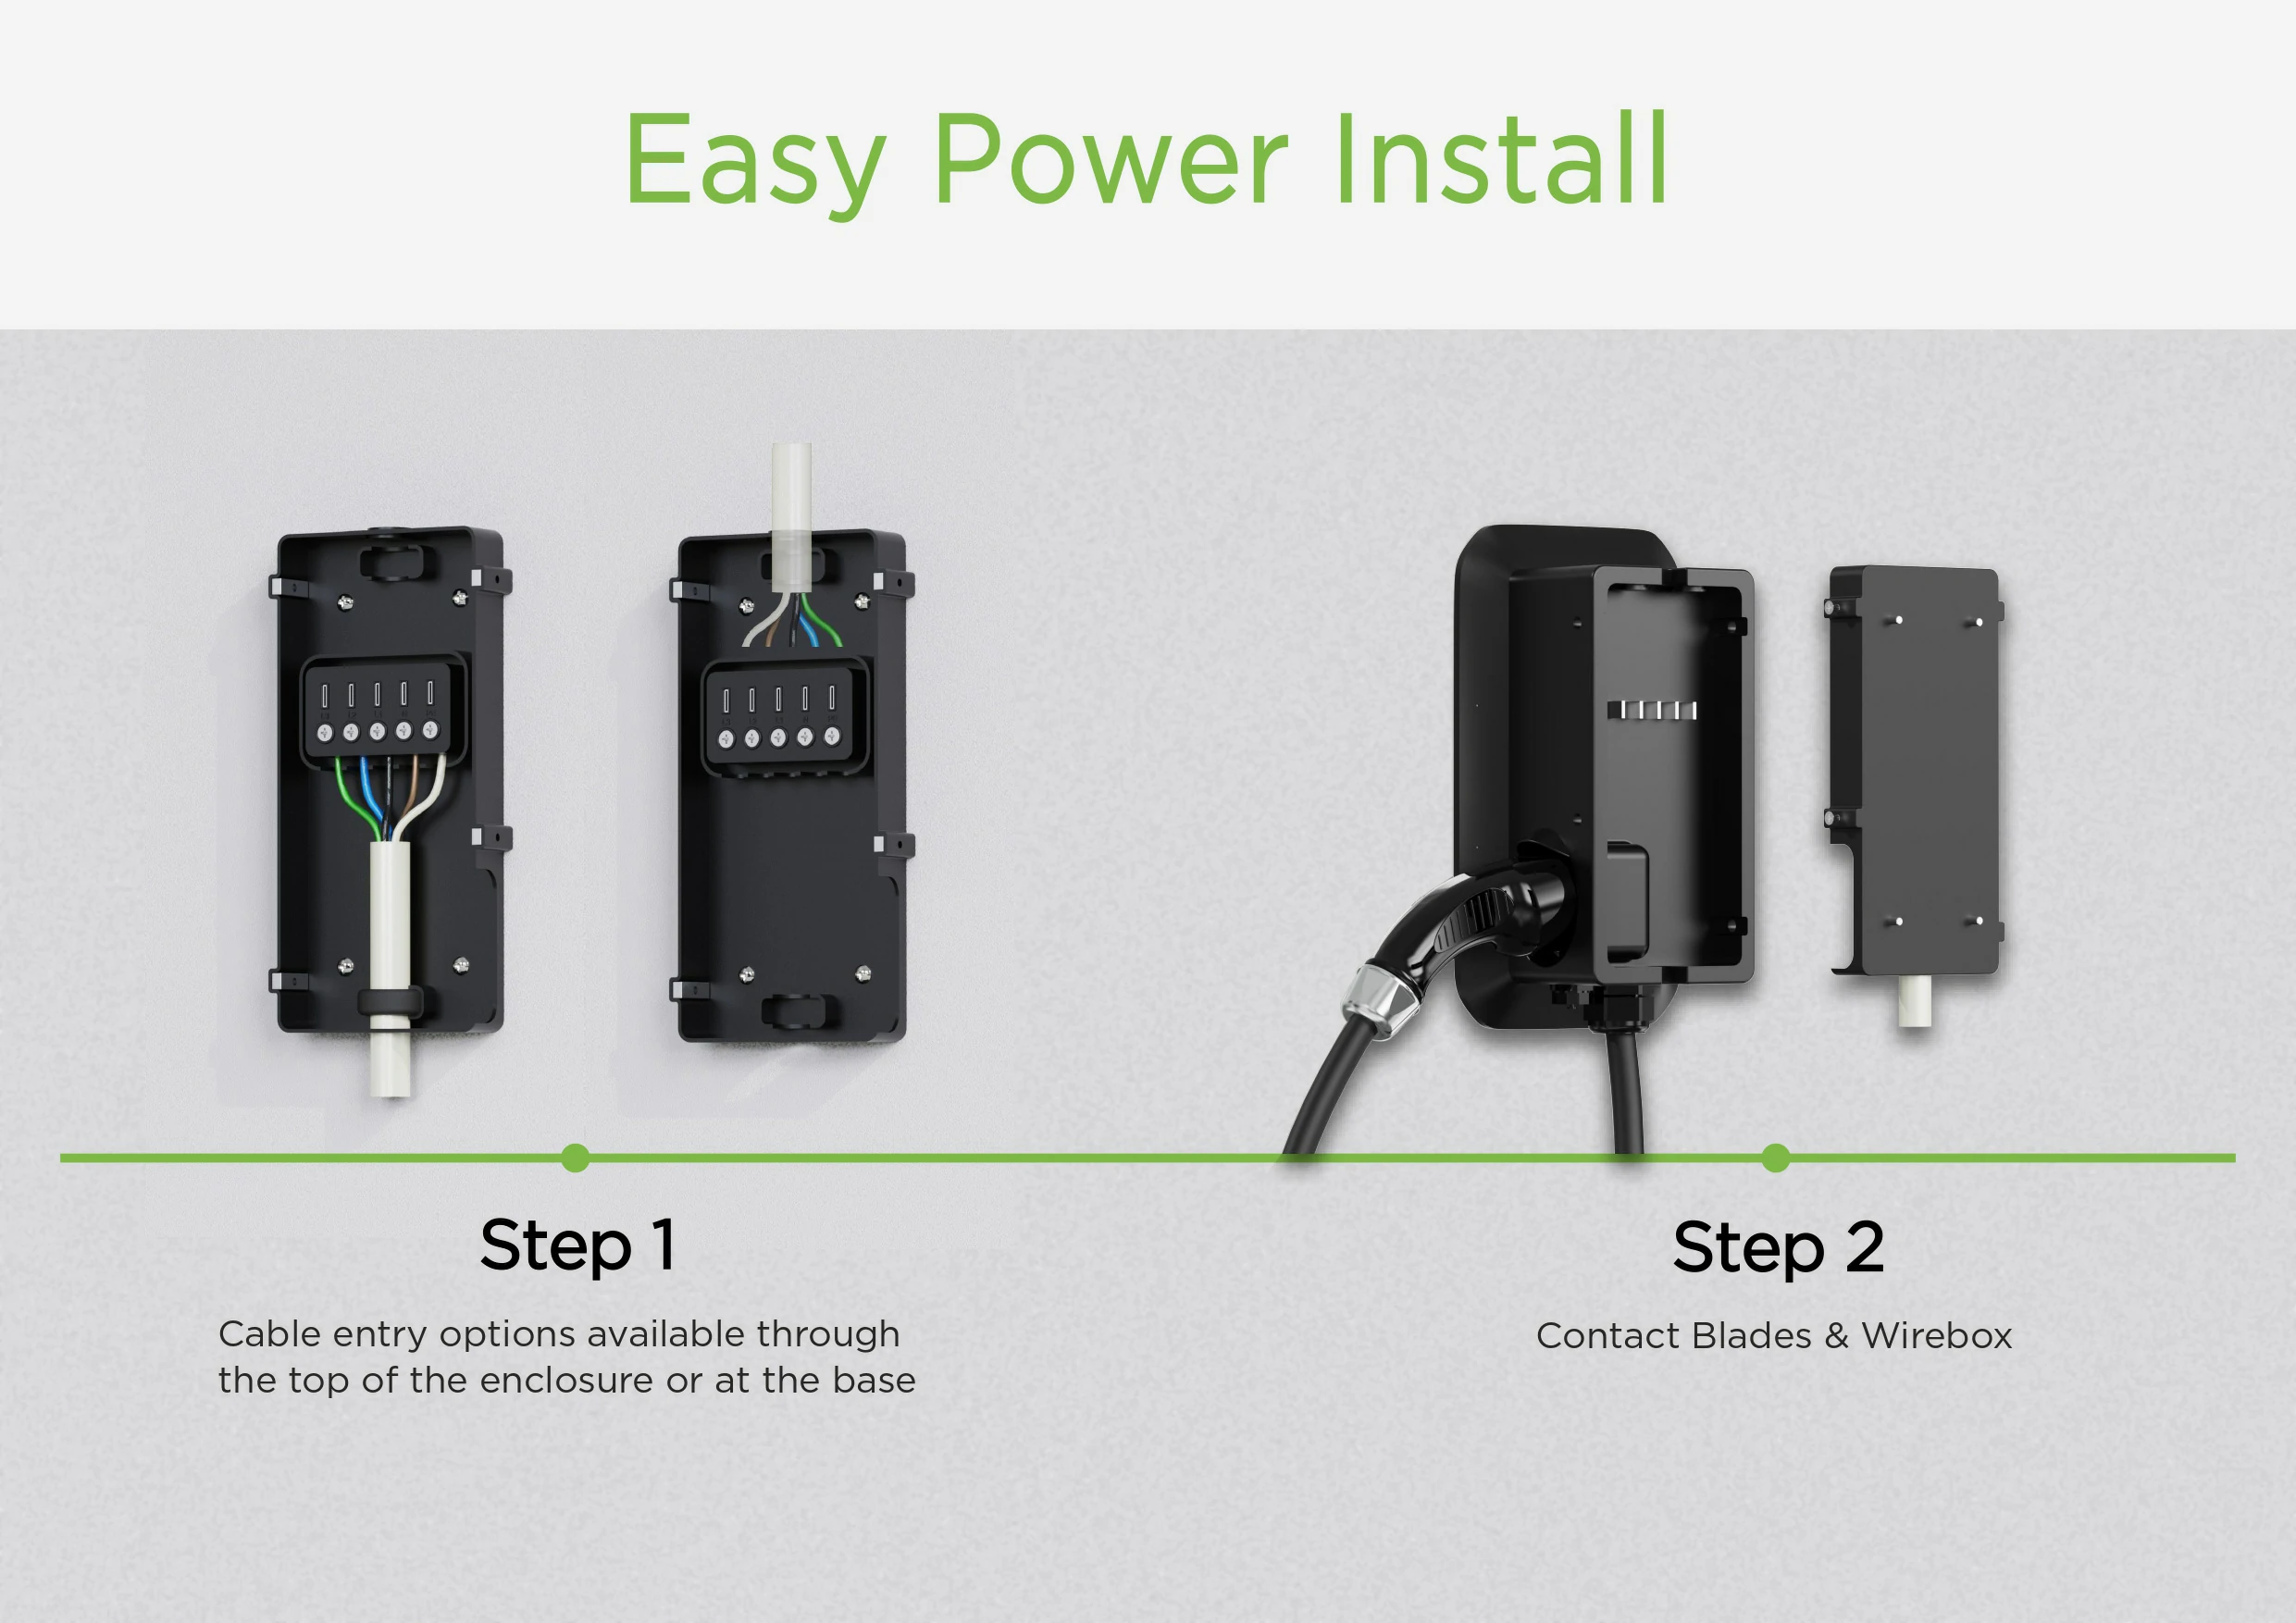 EVC33 has easy and quick power installation steps.